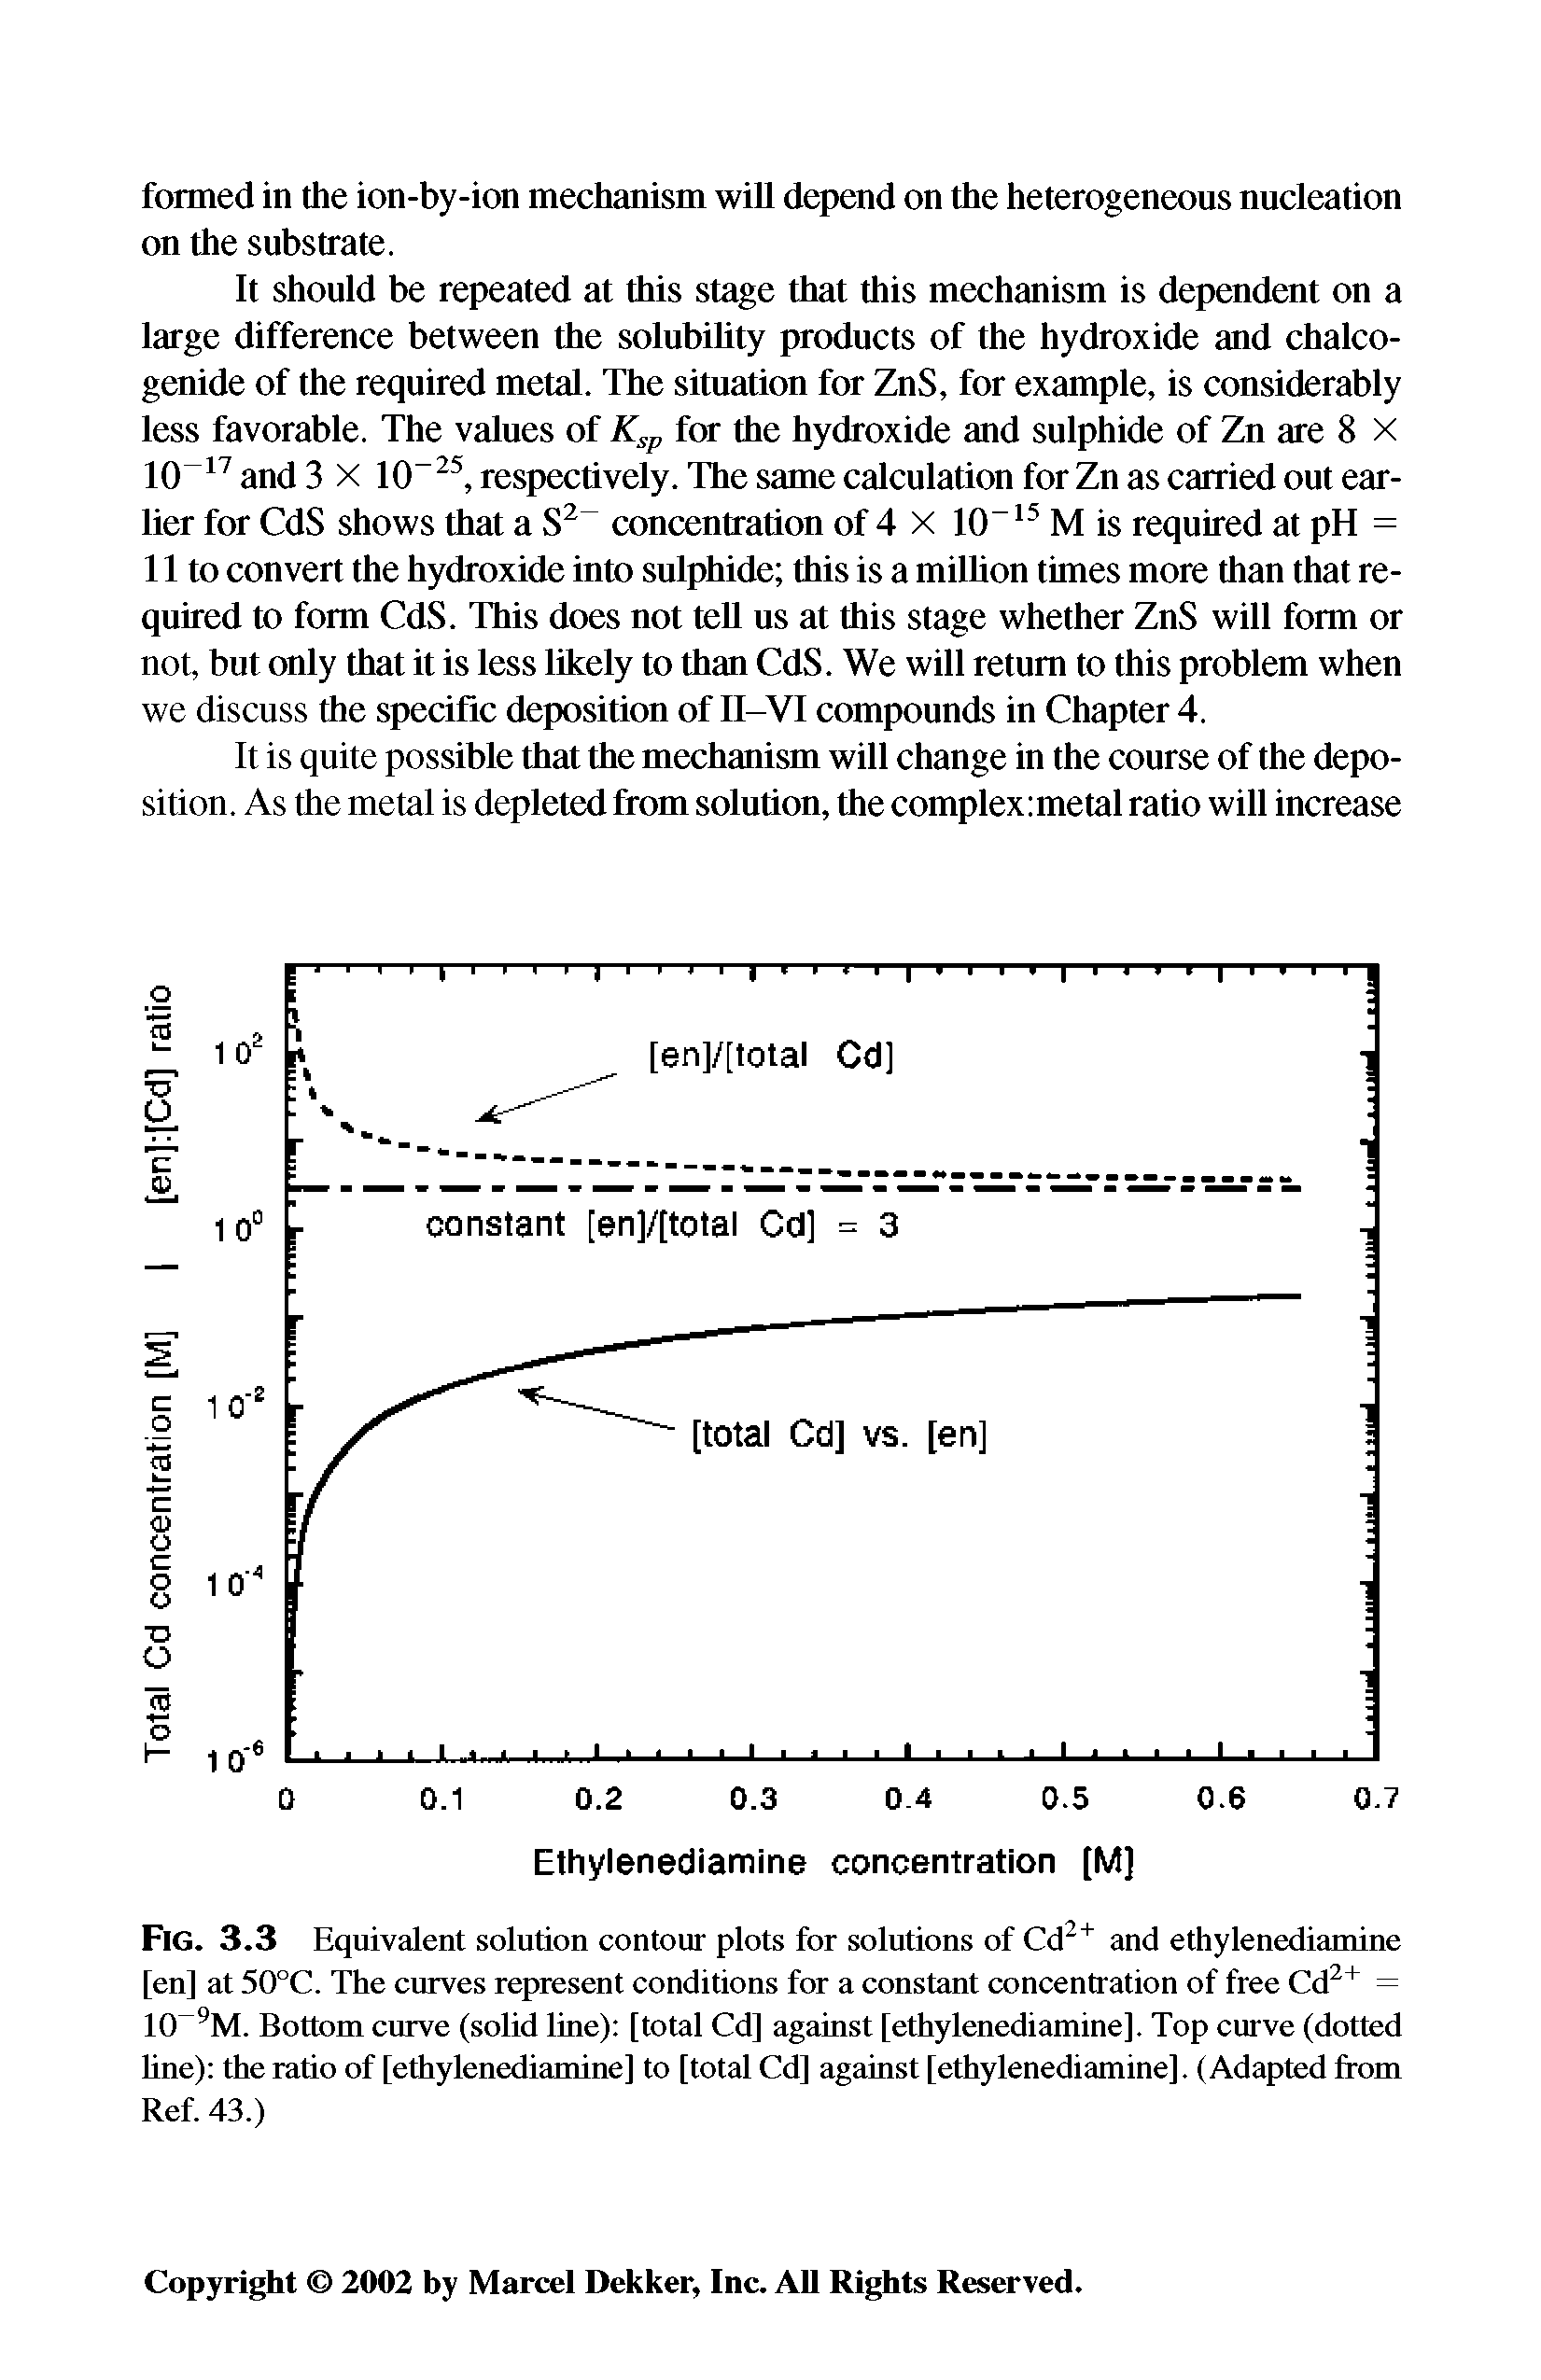 Fig. 3.3 Equivalent solution contour plots for solutions of and ethylenediamine [en] at 50°C. The curves represent conditions for a constant concentration of free Cd = 10 M. Bottom curve (solid line) [total Cd] against [ethylenediamine]. Top curve (dotted hne) the ratio of [ethylenediamine] to [total Cd] against [ethylenediamine]. (Adapted from Ref. 43.)...